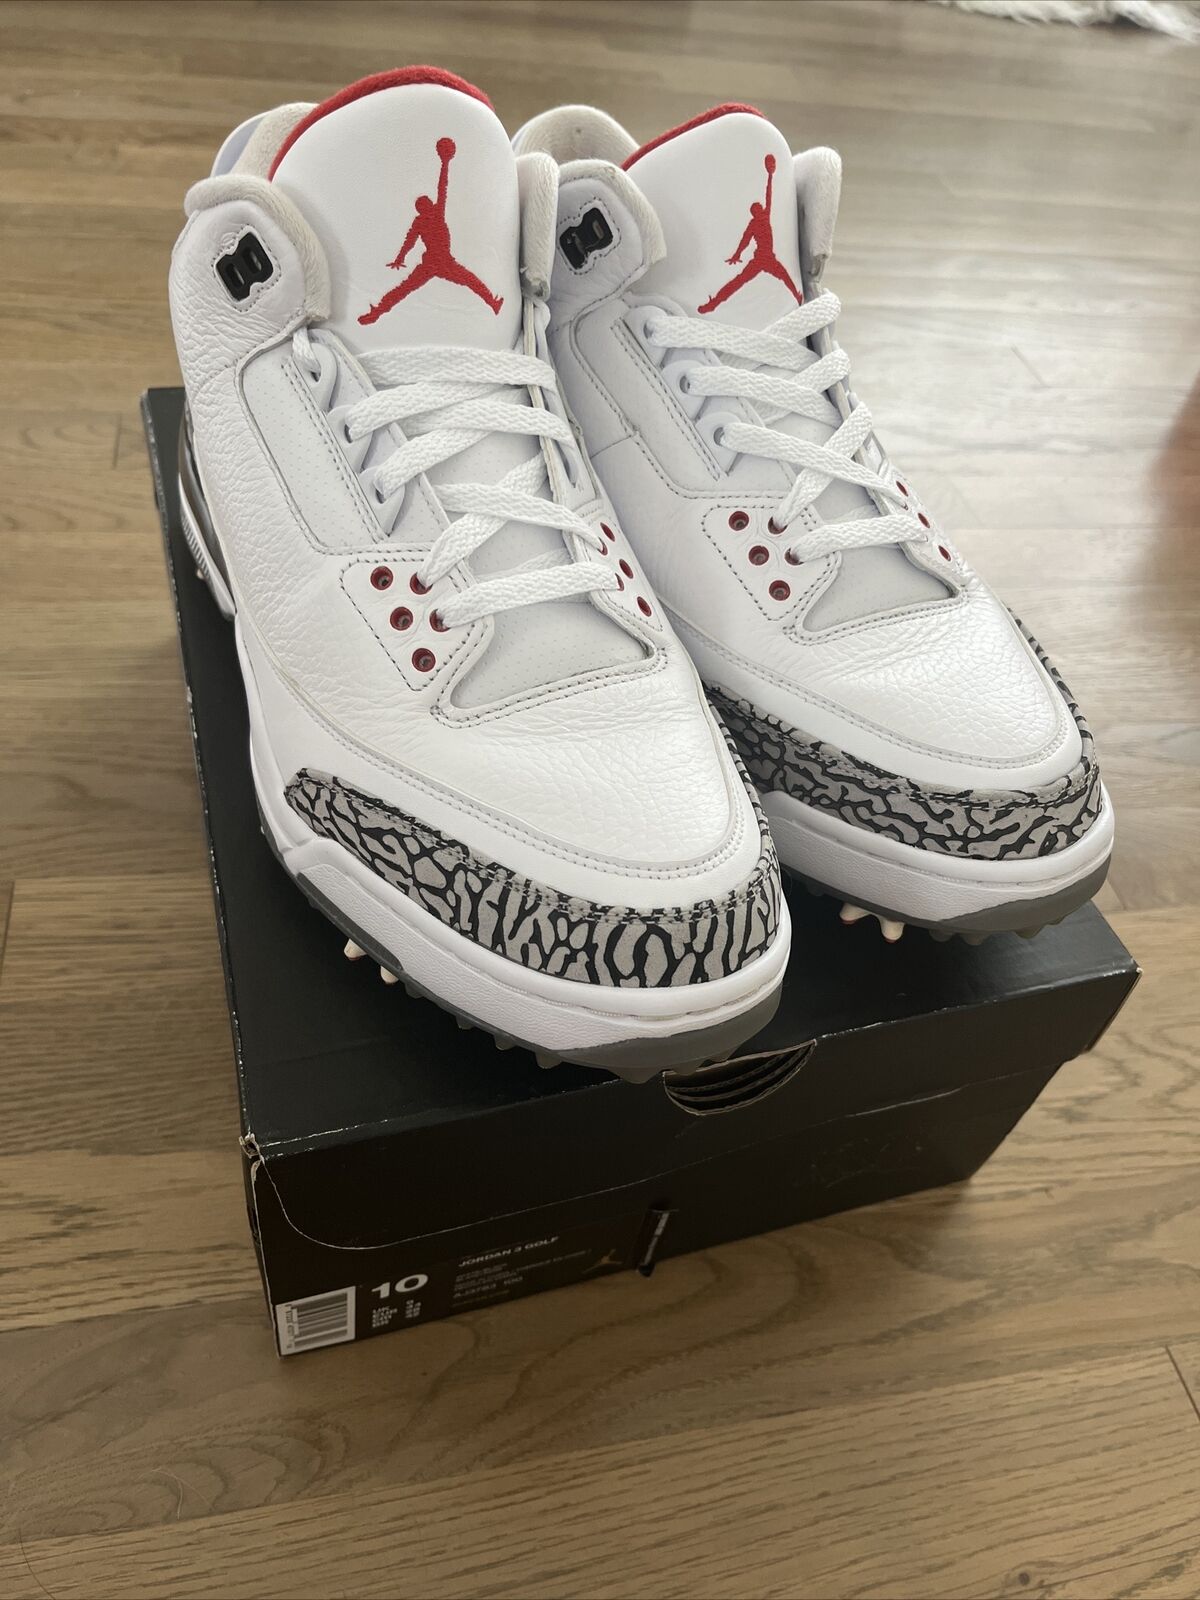 Jordan 3 Golf White Cement 2018 for Sale | Authenticity Guaranteed 